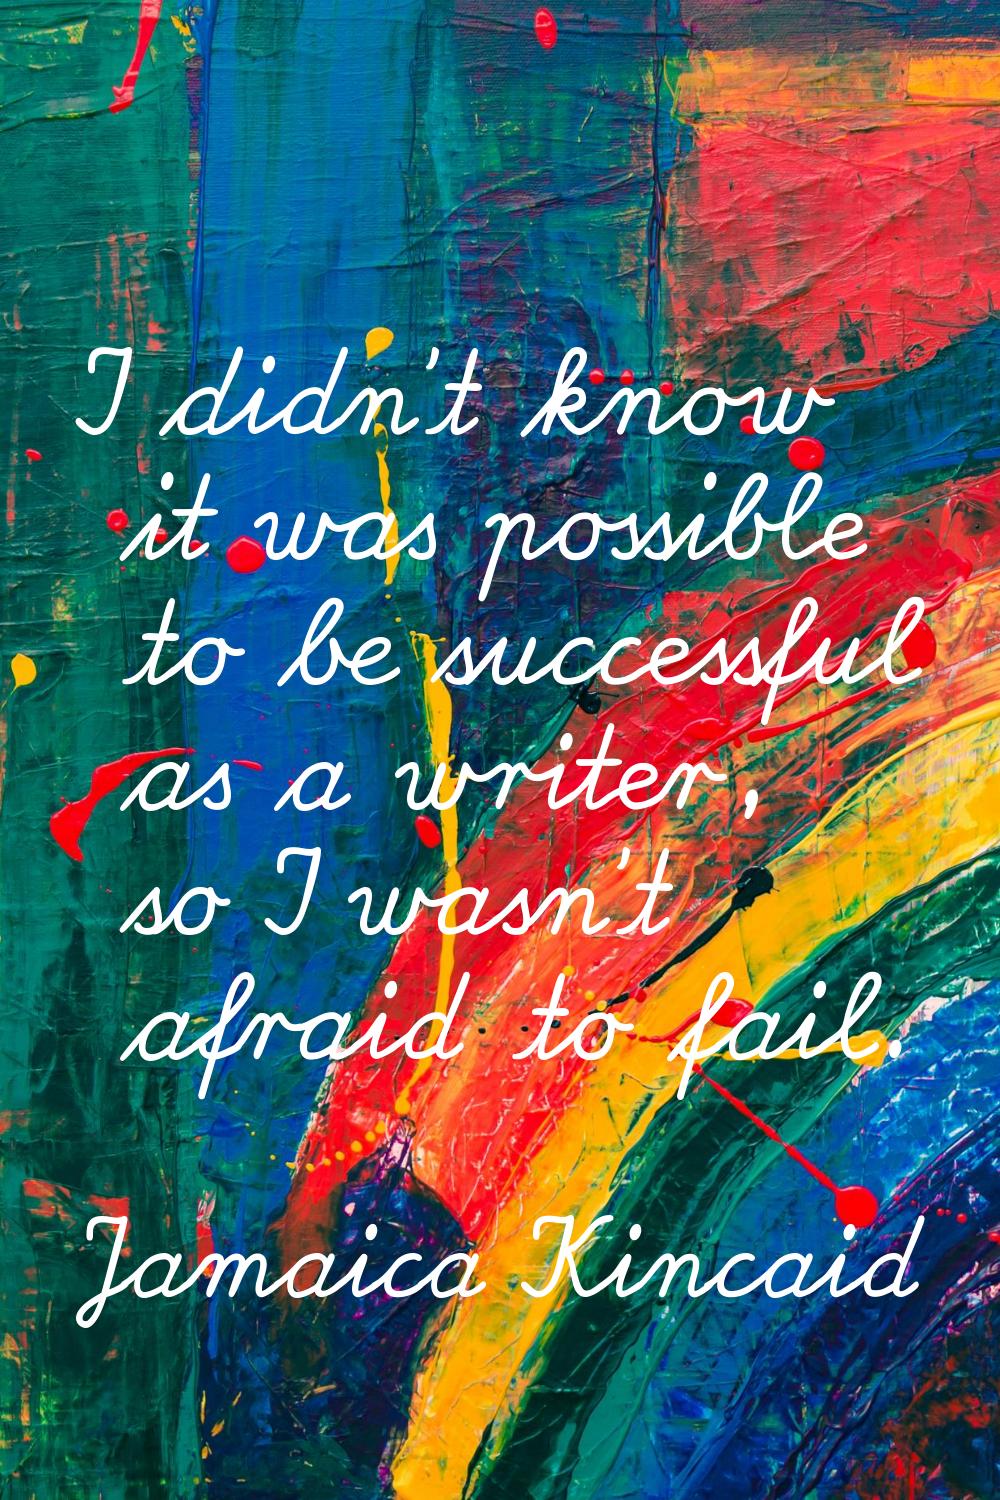 I didn't know it was possible to be successful as a writer, so I wasn't afraid to fail.